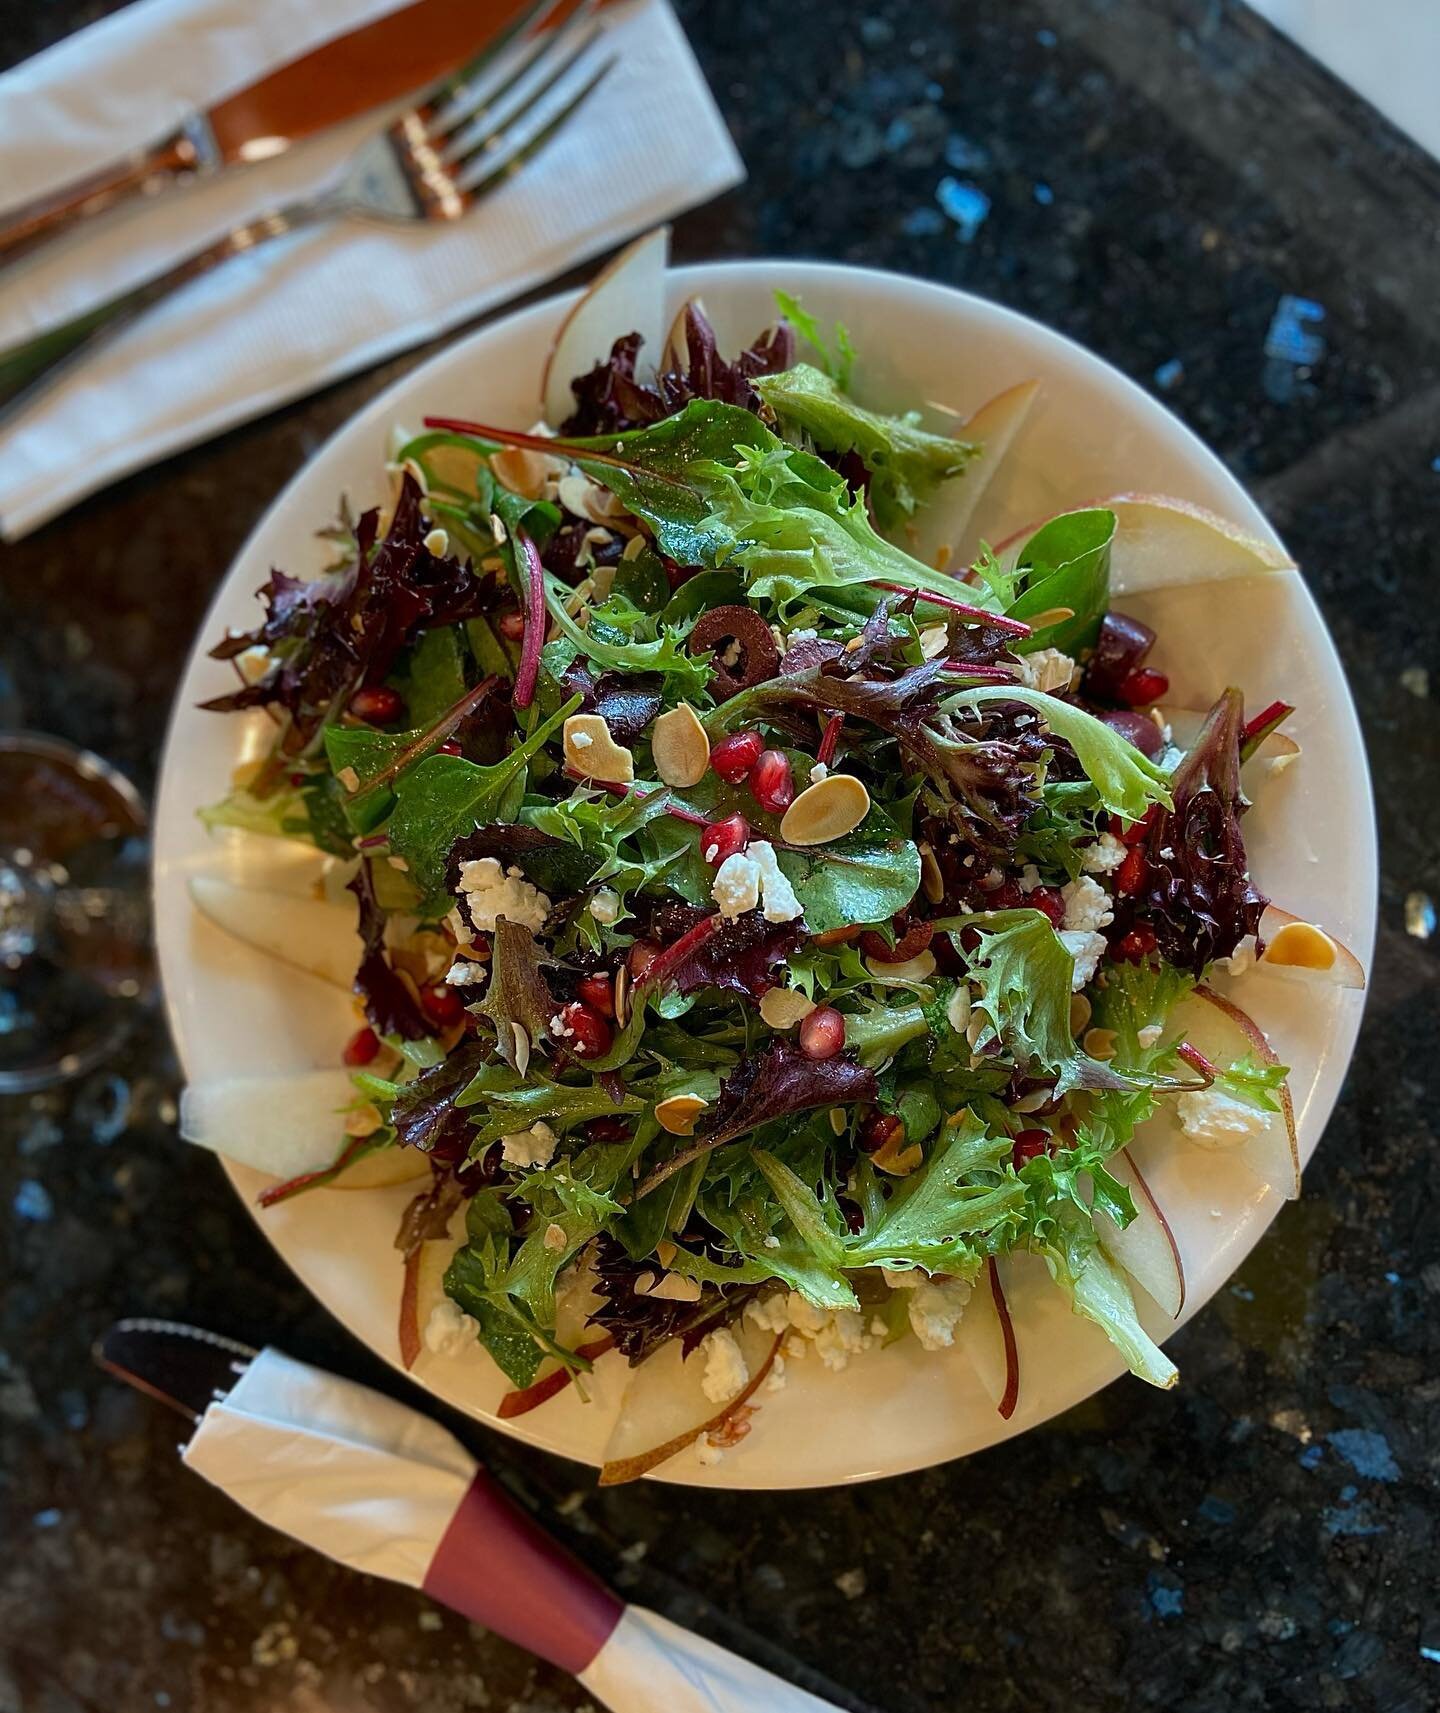 We&rsquo;re waiting for you to enjoy Zamaan salad
.
Fresh and delicious with goat cheese, almonds and pomegranate and fresh pears 
.

𝐖𝐞 𝐚𝐫𝐞 𝐥𝐨𝐨𝐤𝐢𝐧𝐠 𝐟𝐨𝐫𝐰𝐚𝐫𝐝 𝐭𝐨 𝐬𝐞𝐞𝐢𝐧𝐠 𝐲𝐨𝐮:
📍8915 5th Ave, Brooklyn, NY 11209
📱(718)-333-5